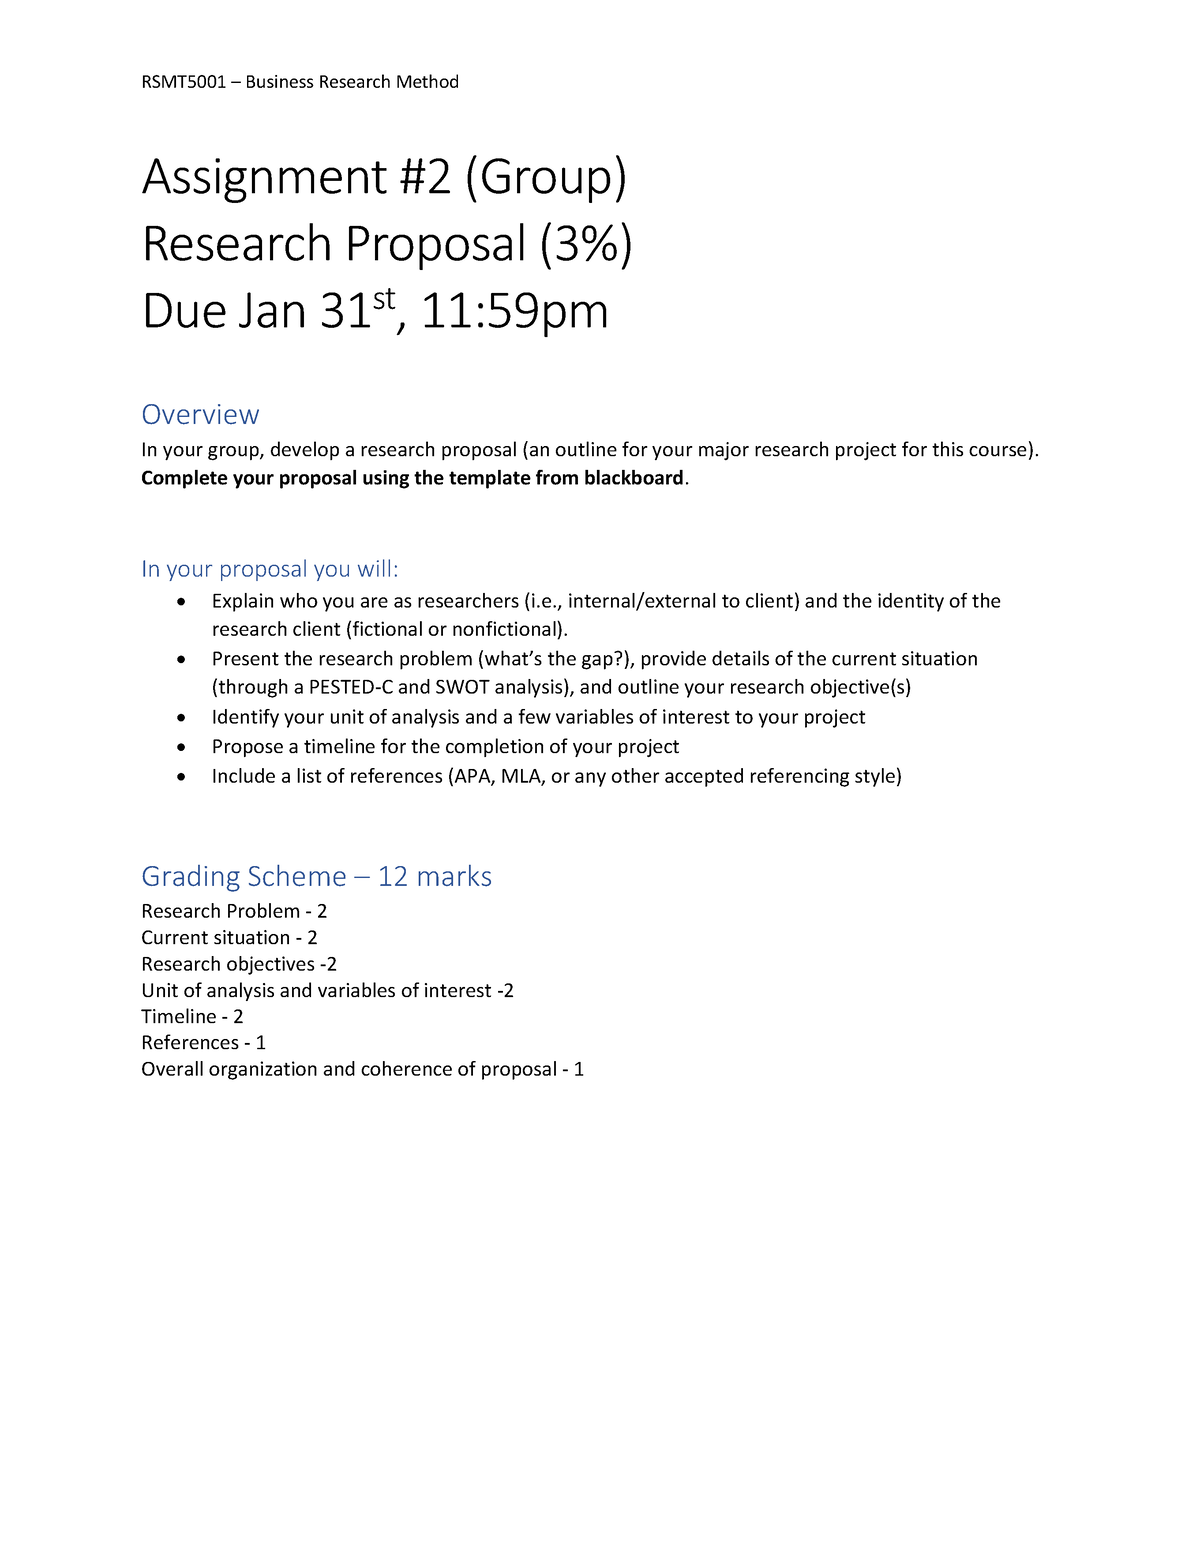 business research assignment pdf